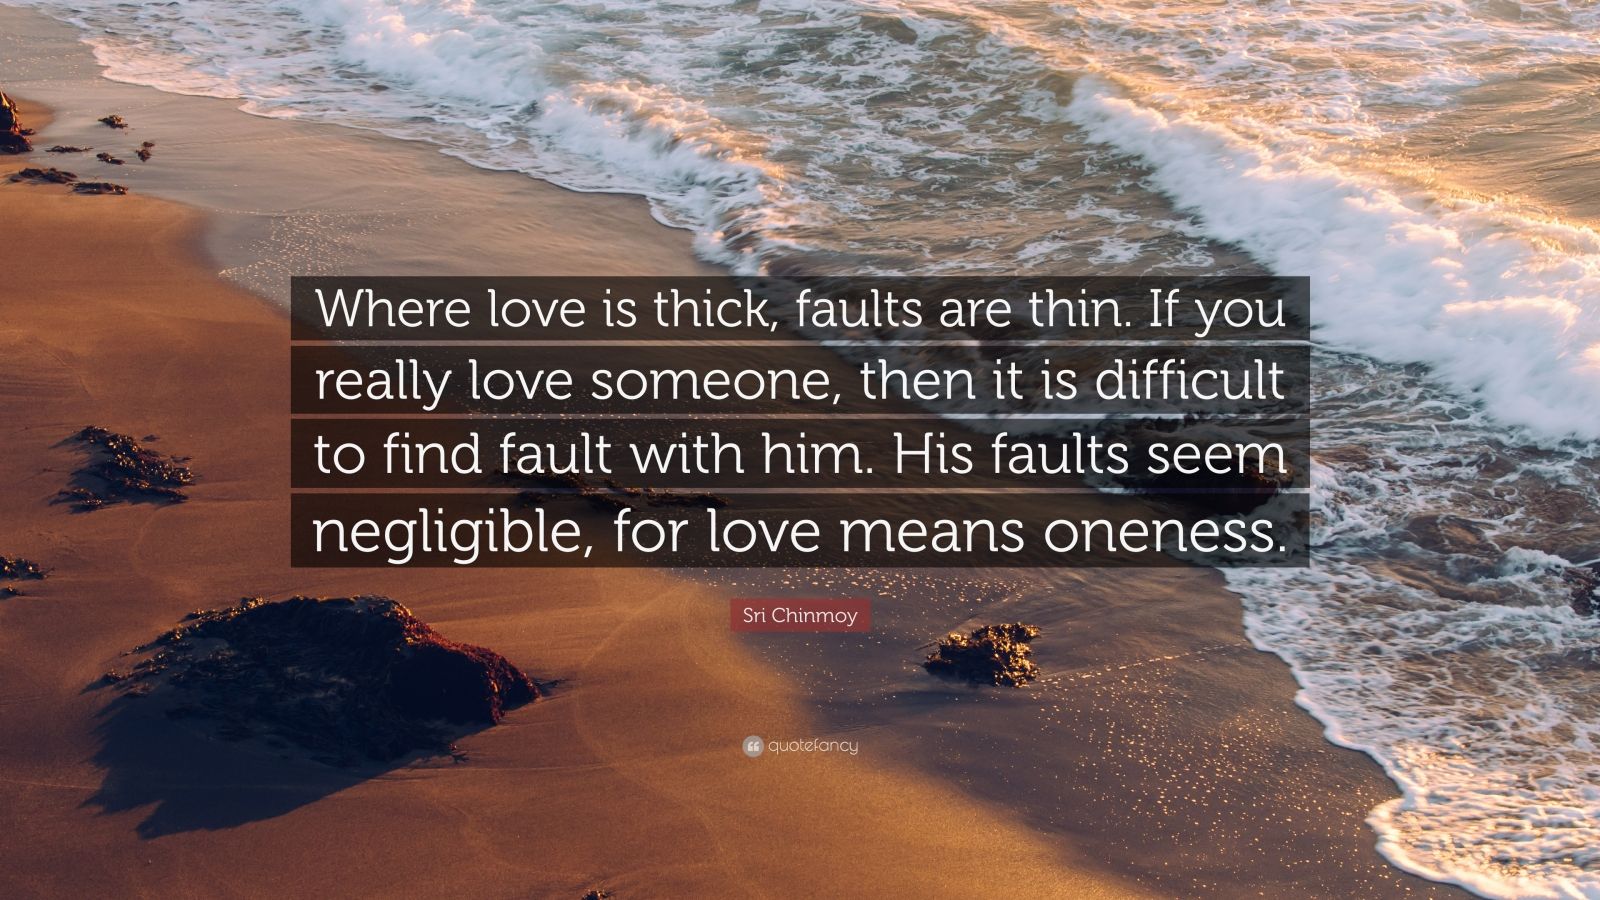 Sri Chinmoy Quote: “Where love is thick, faults are thin. If you really ...